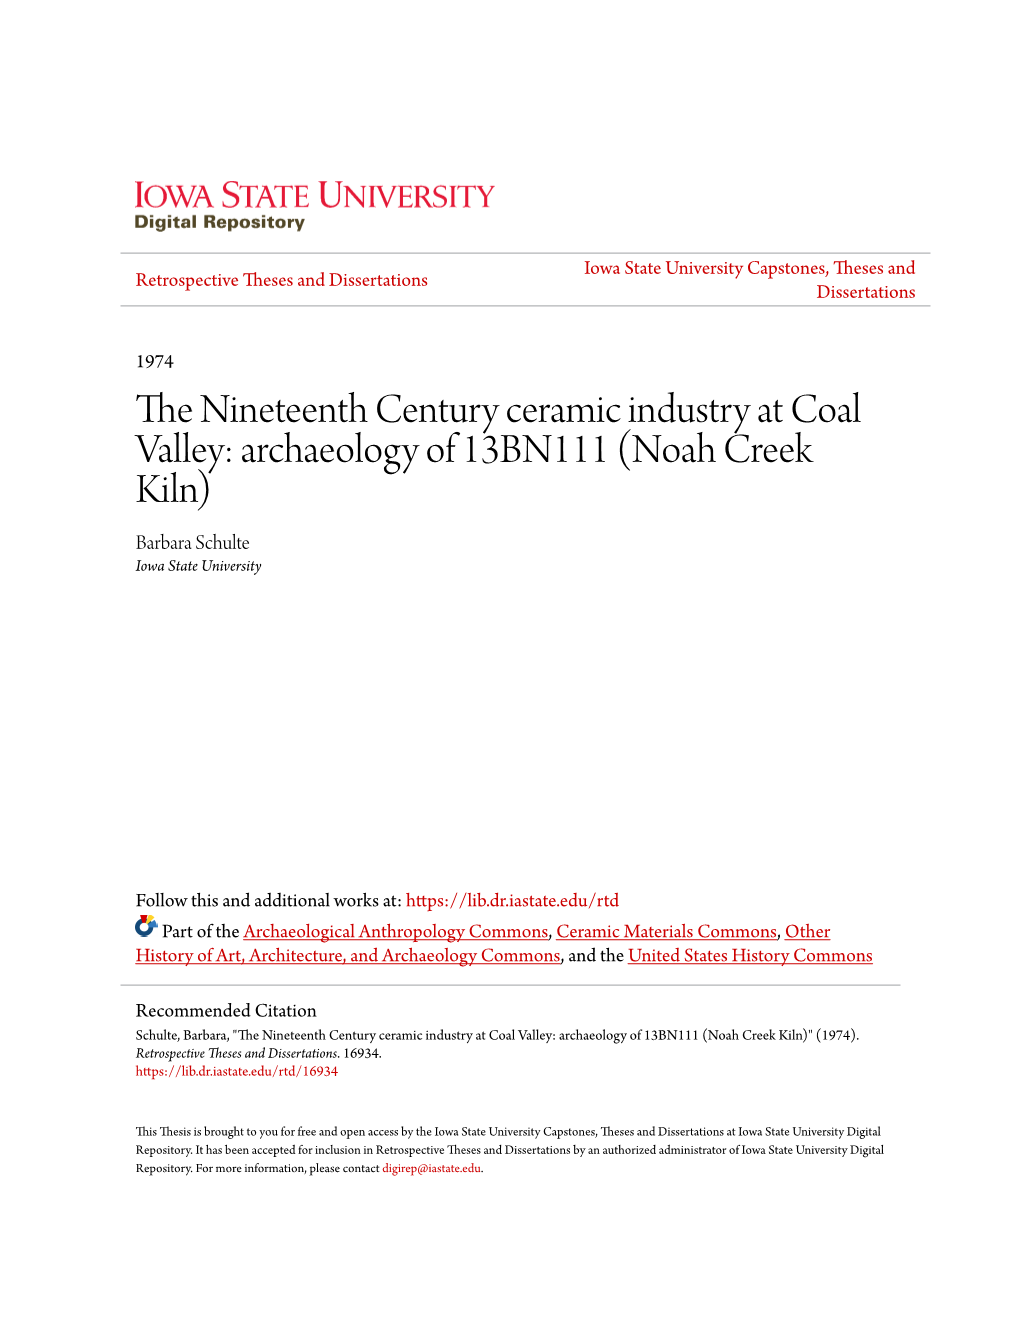 The Nineteenth Century Ceramic Industry at Coal Valley: Archaeology of 13BN111 (Noah Creek Kiln)